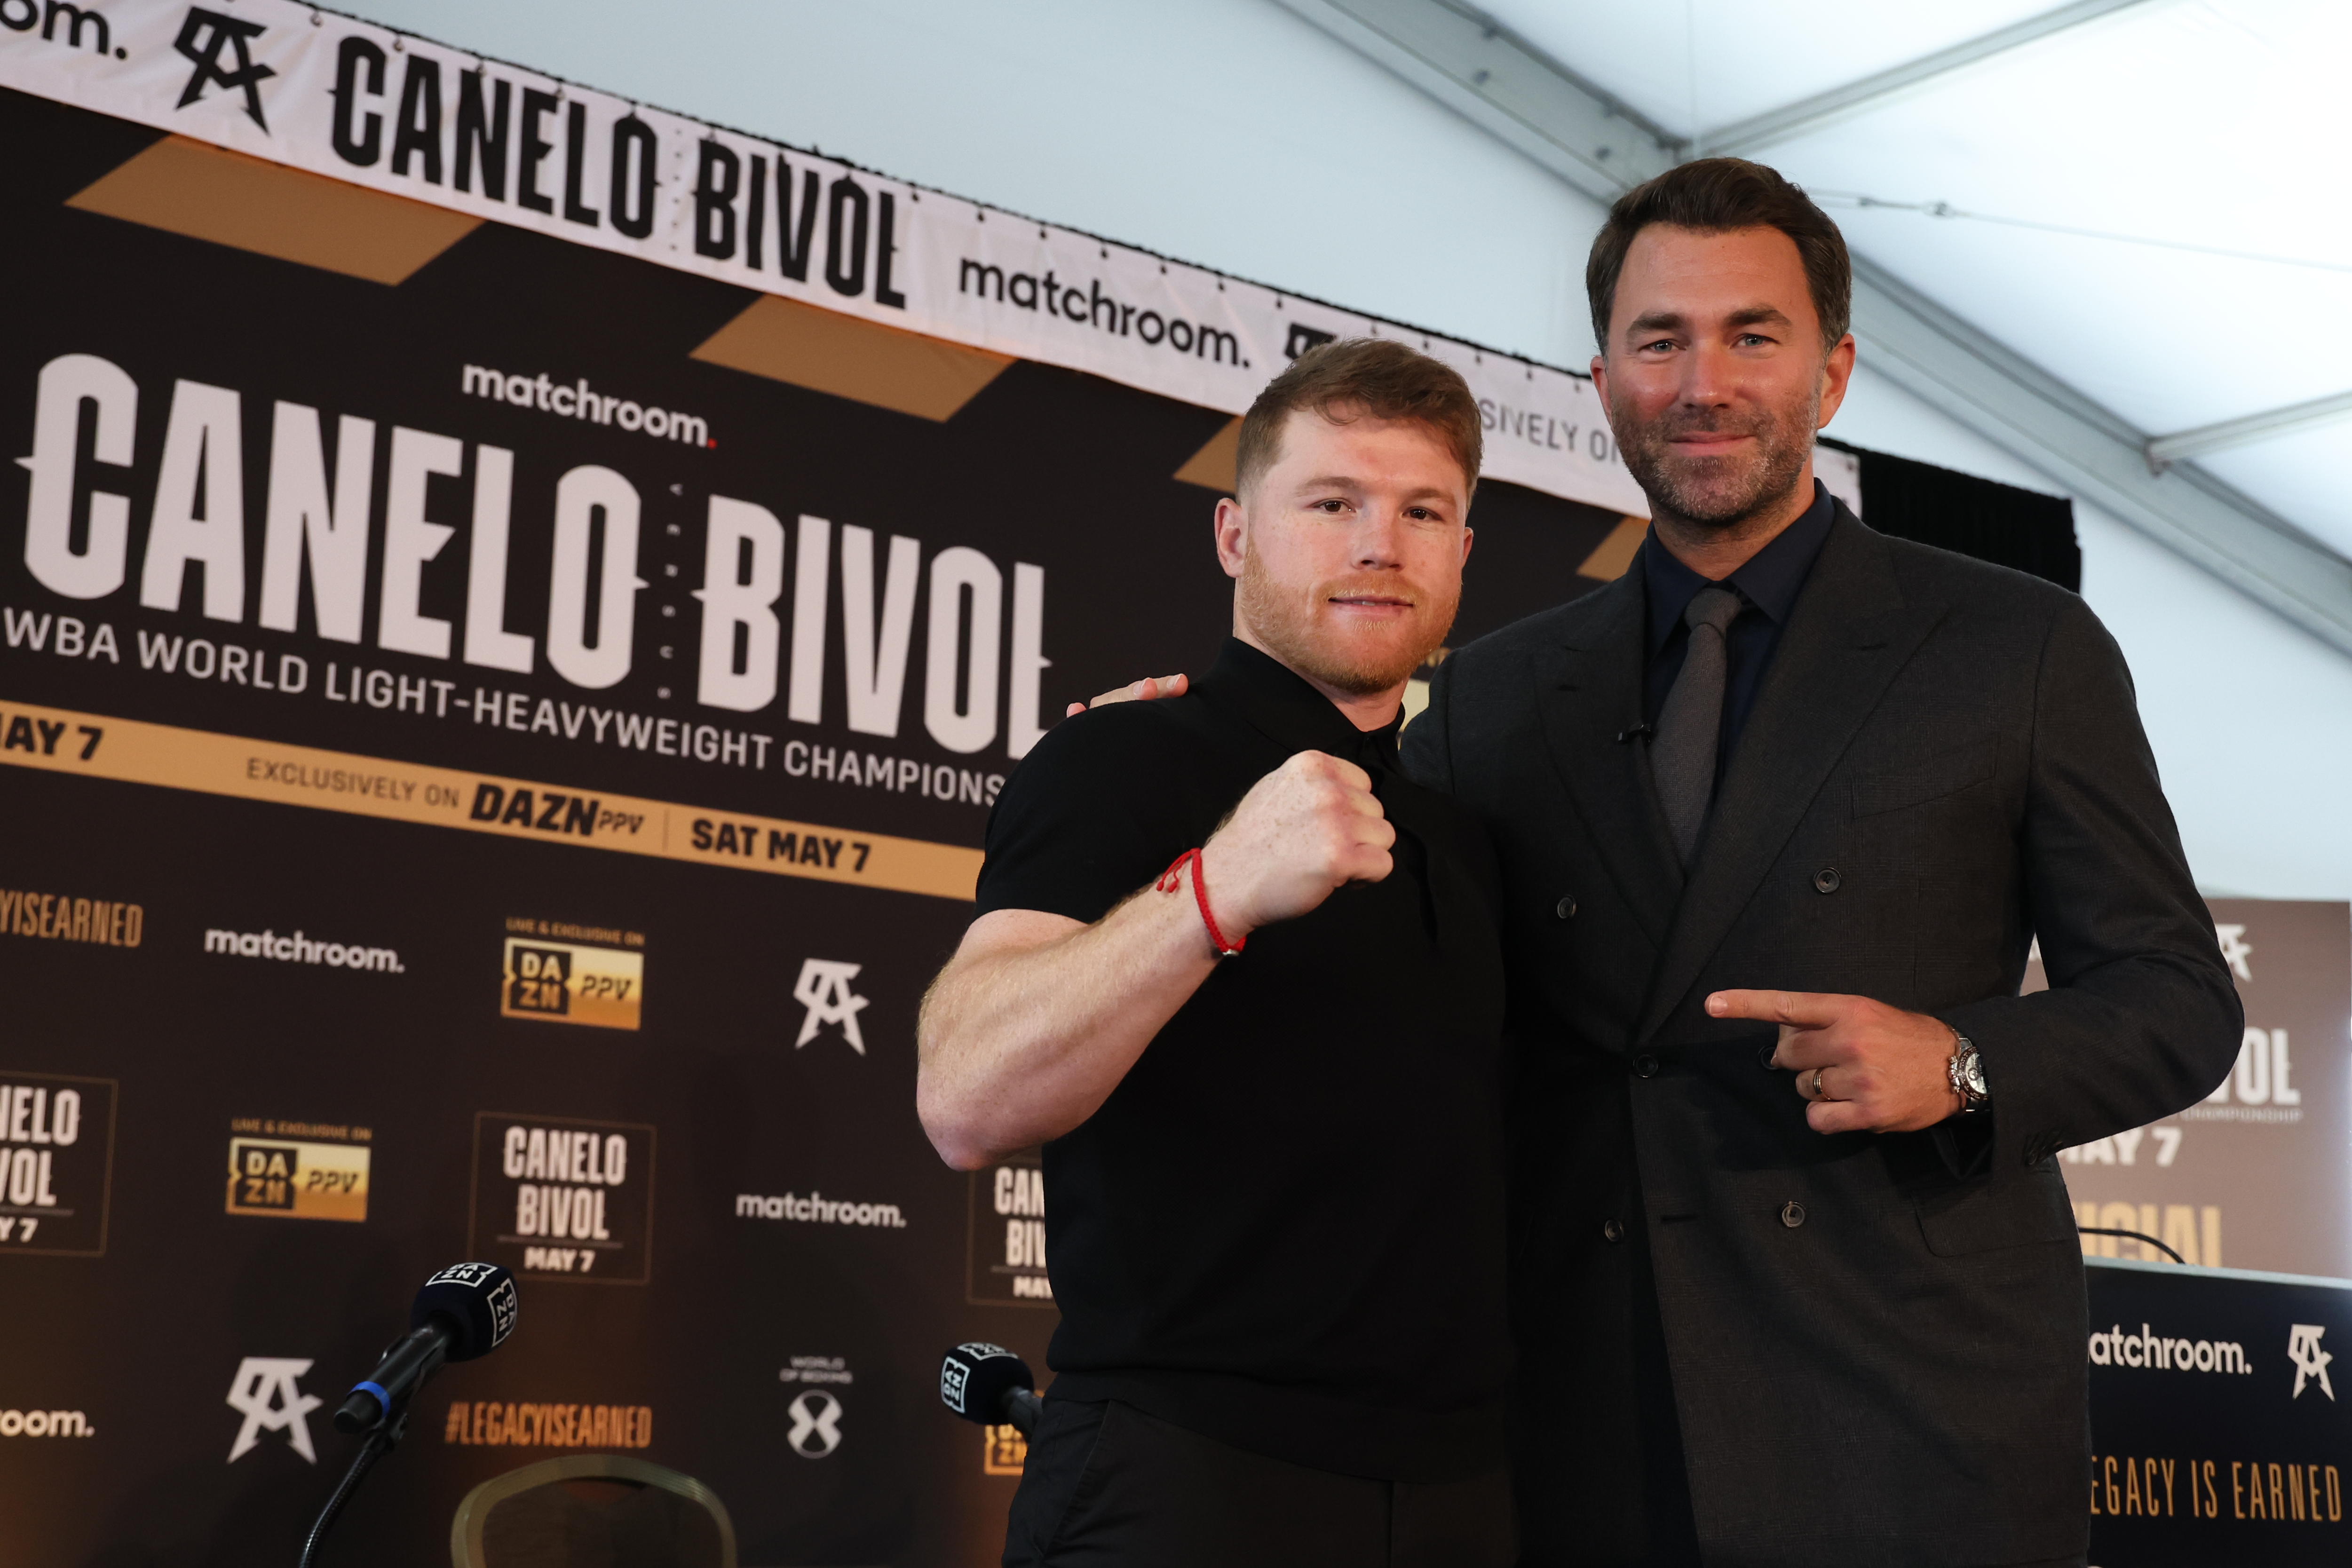 Eddie Hearn sees Canelo Alvarez as half of boxing’s two biggest fights right now